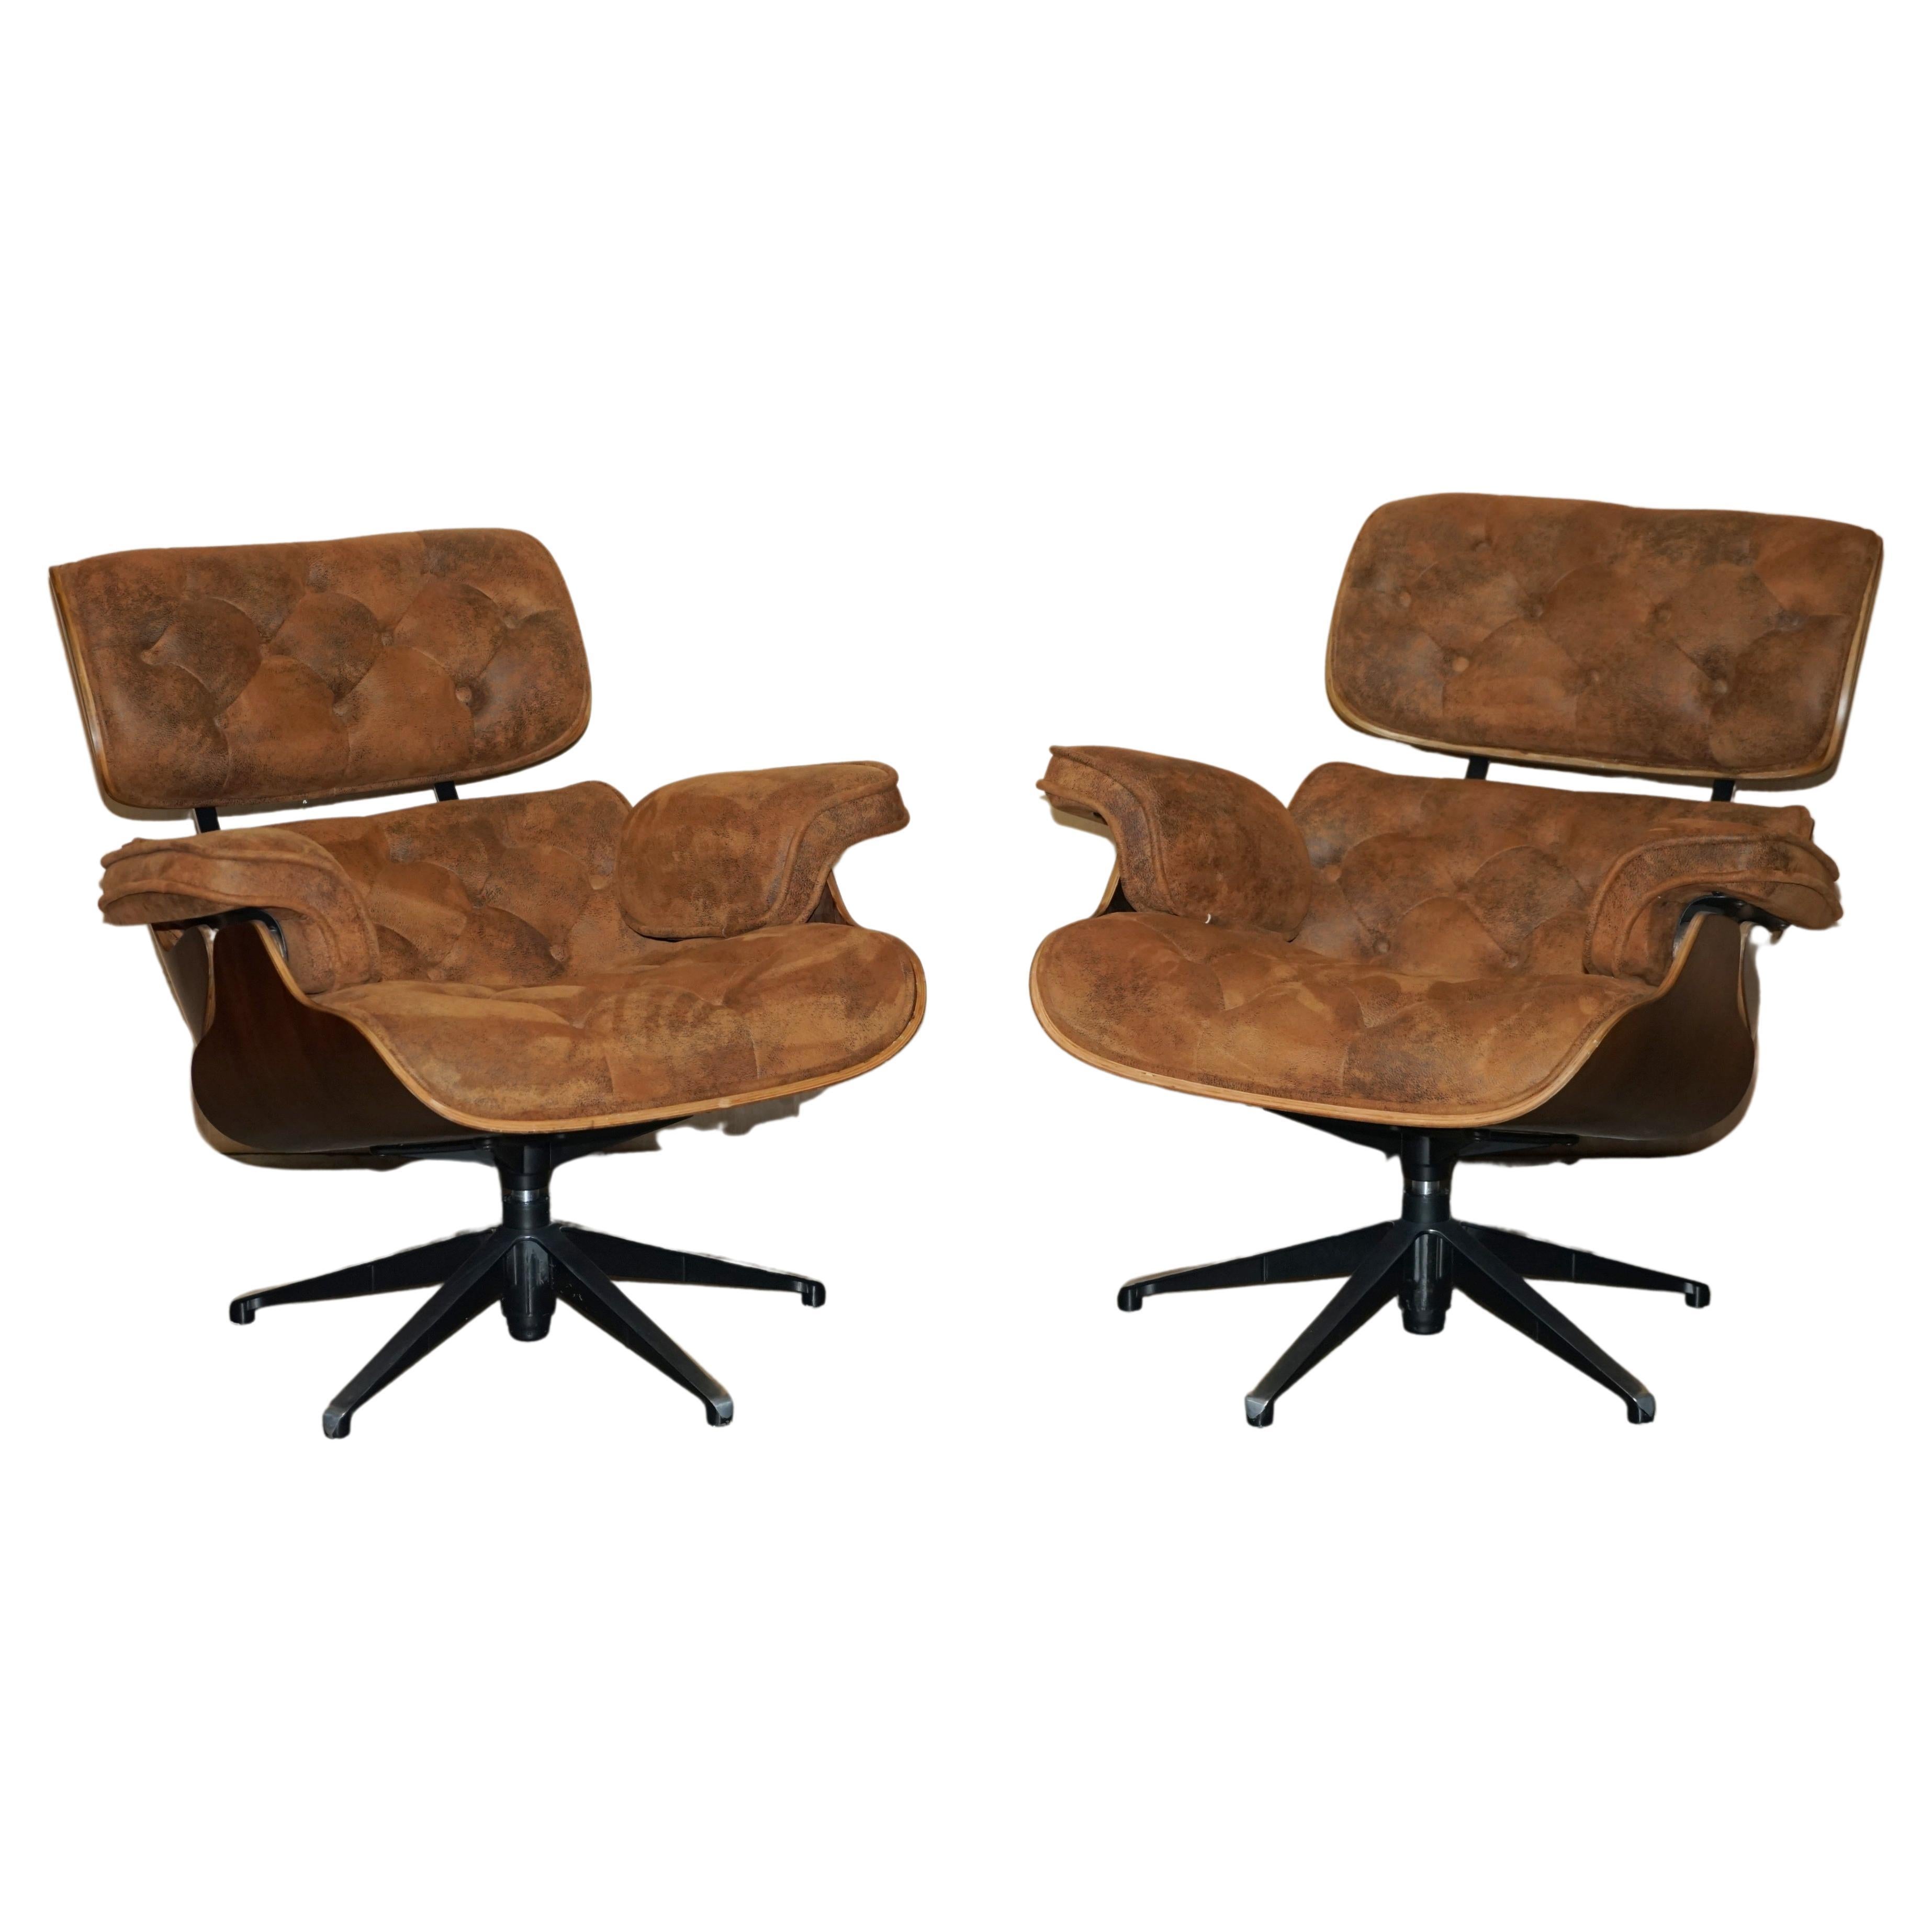 Pair of Chesterfield Tufted Heritage Brown Suede Leather Lounge Armchairs